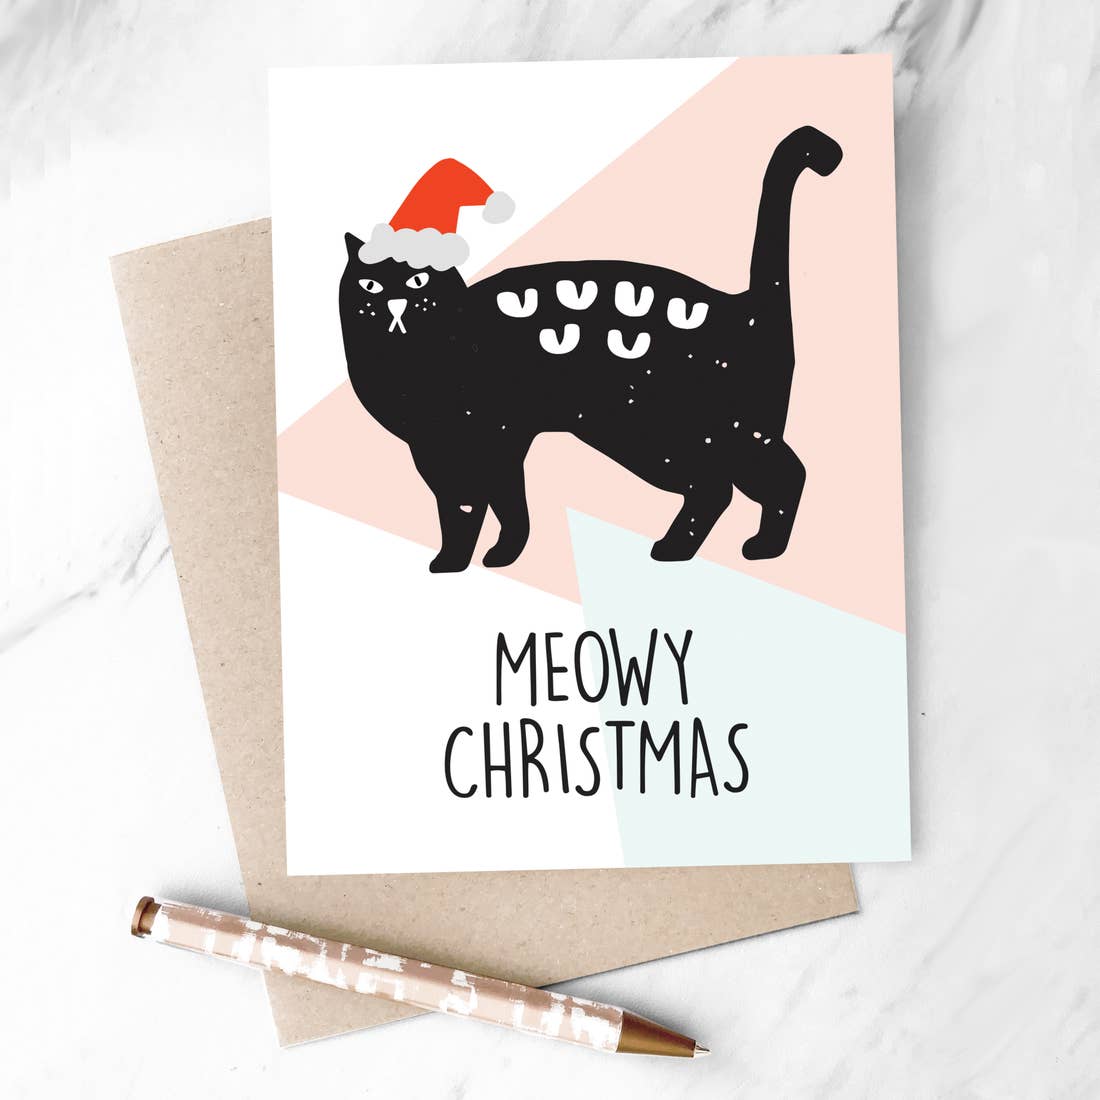 Meowy Christmas Card with a Cat in a Santa hat 